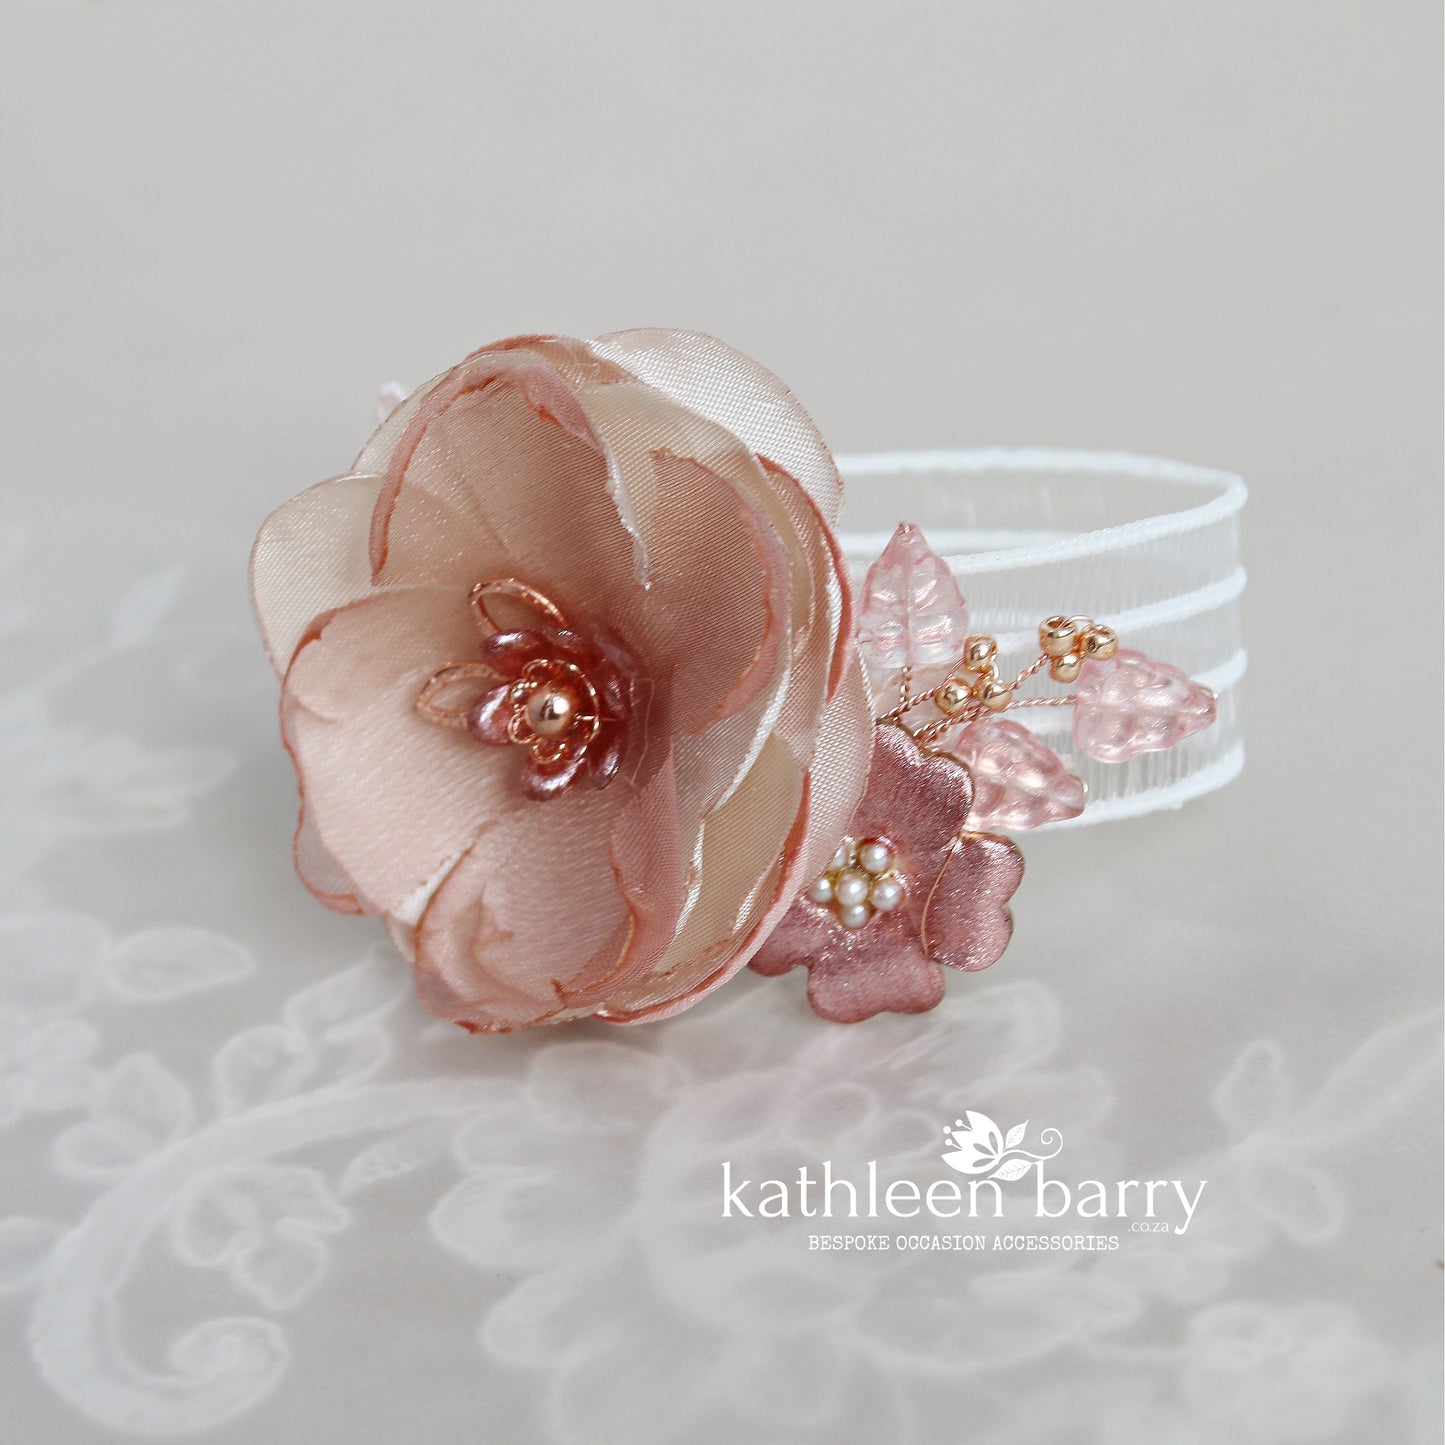 Kayla wrist corsage / cuff bracelet - Rose gold, gold or silver finish (colors on request)